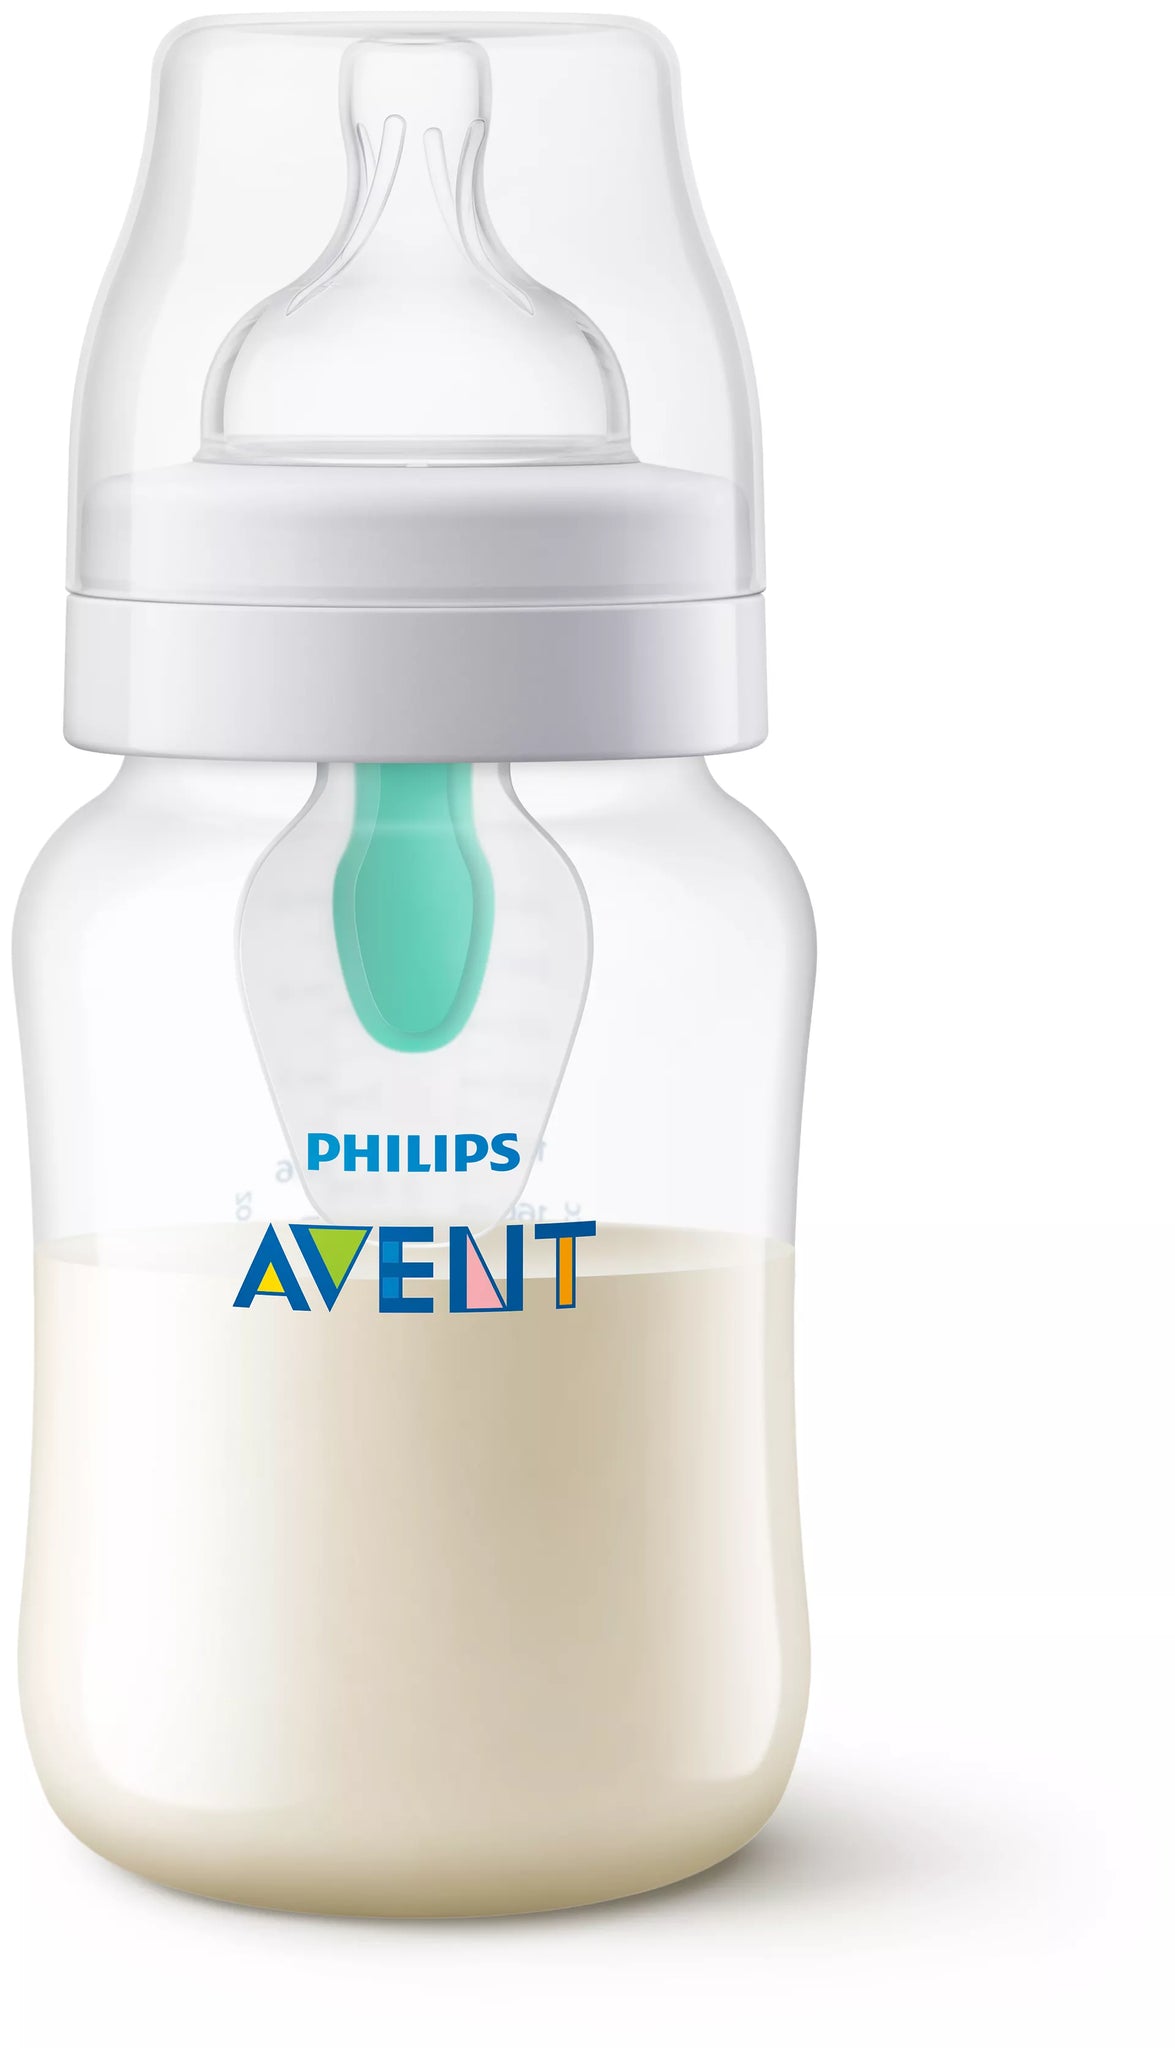 Avent Anti-Colic Bottle Gift Sets 19 piece